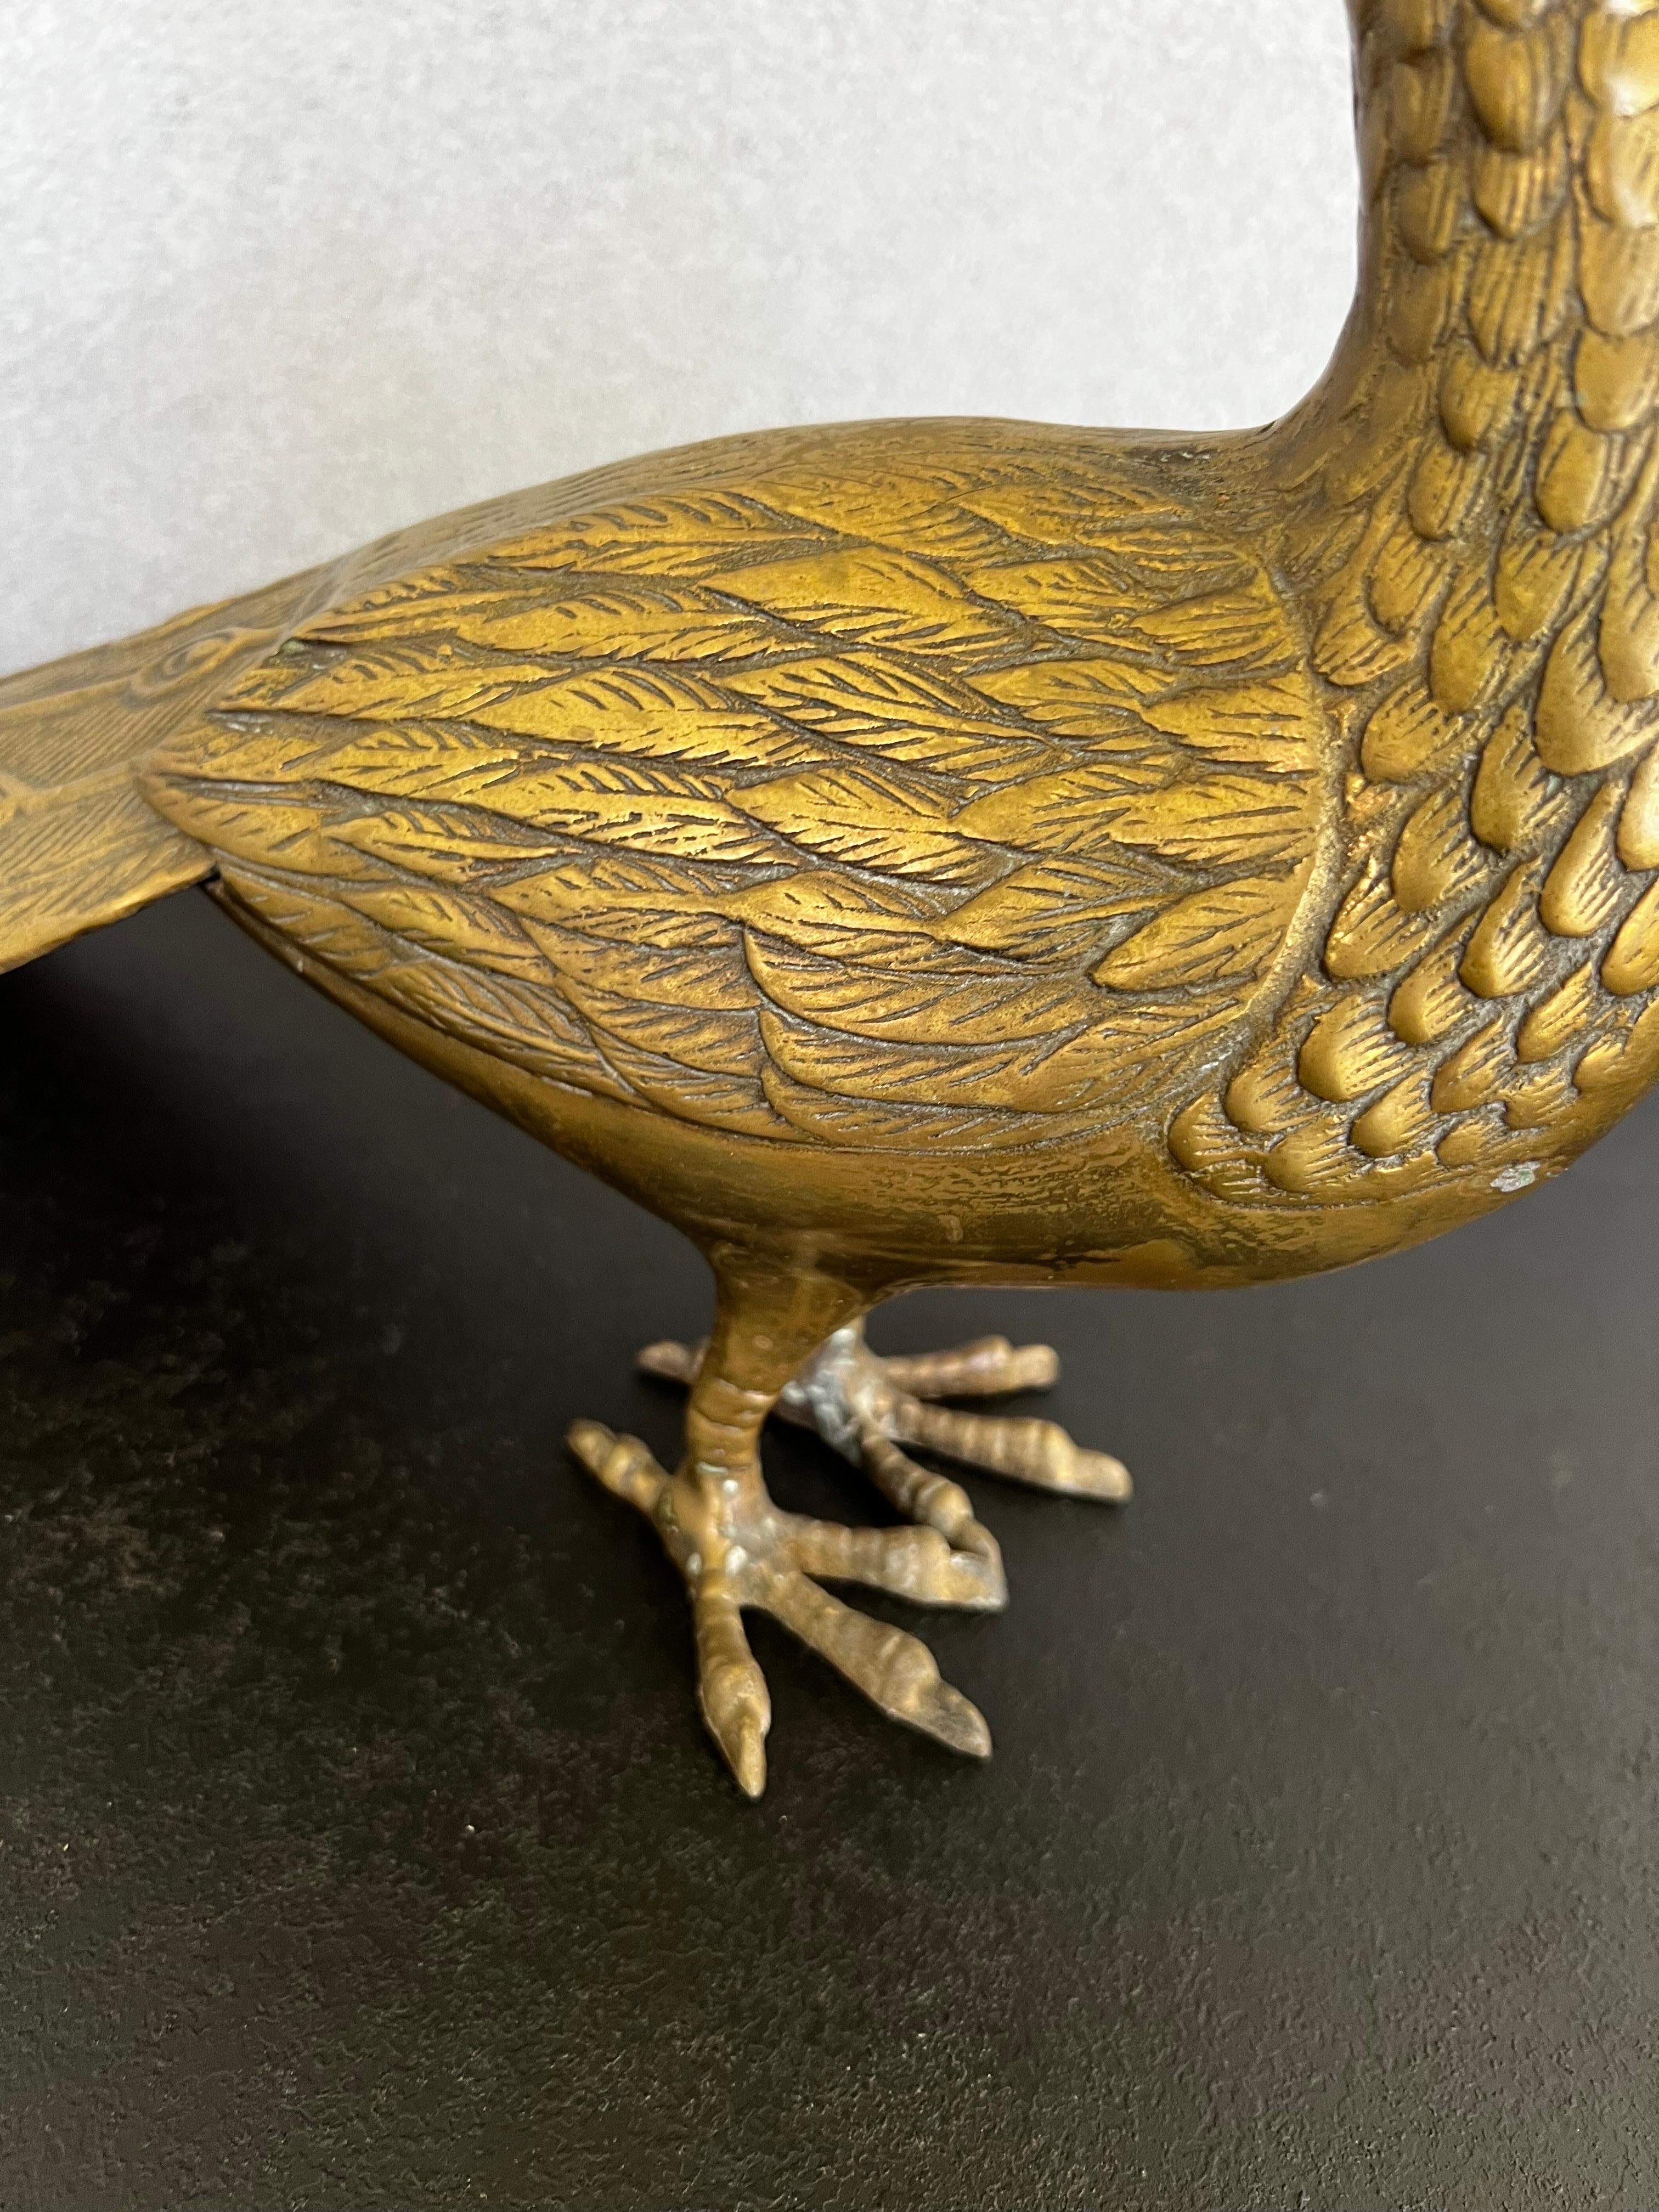 Stunning single peacock made of heavy solid brass. measures an impressive 22